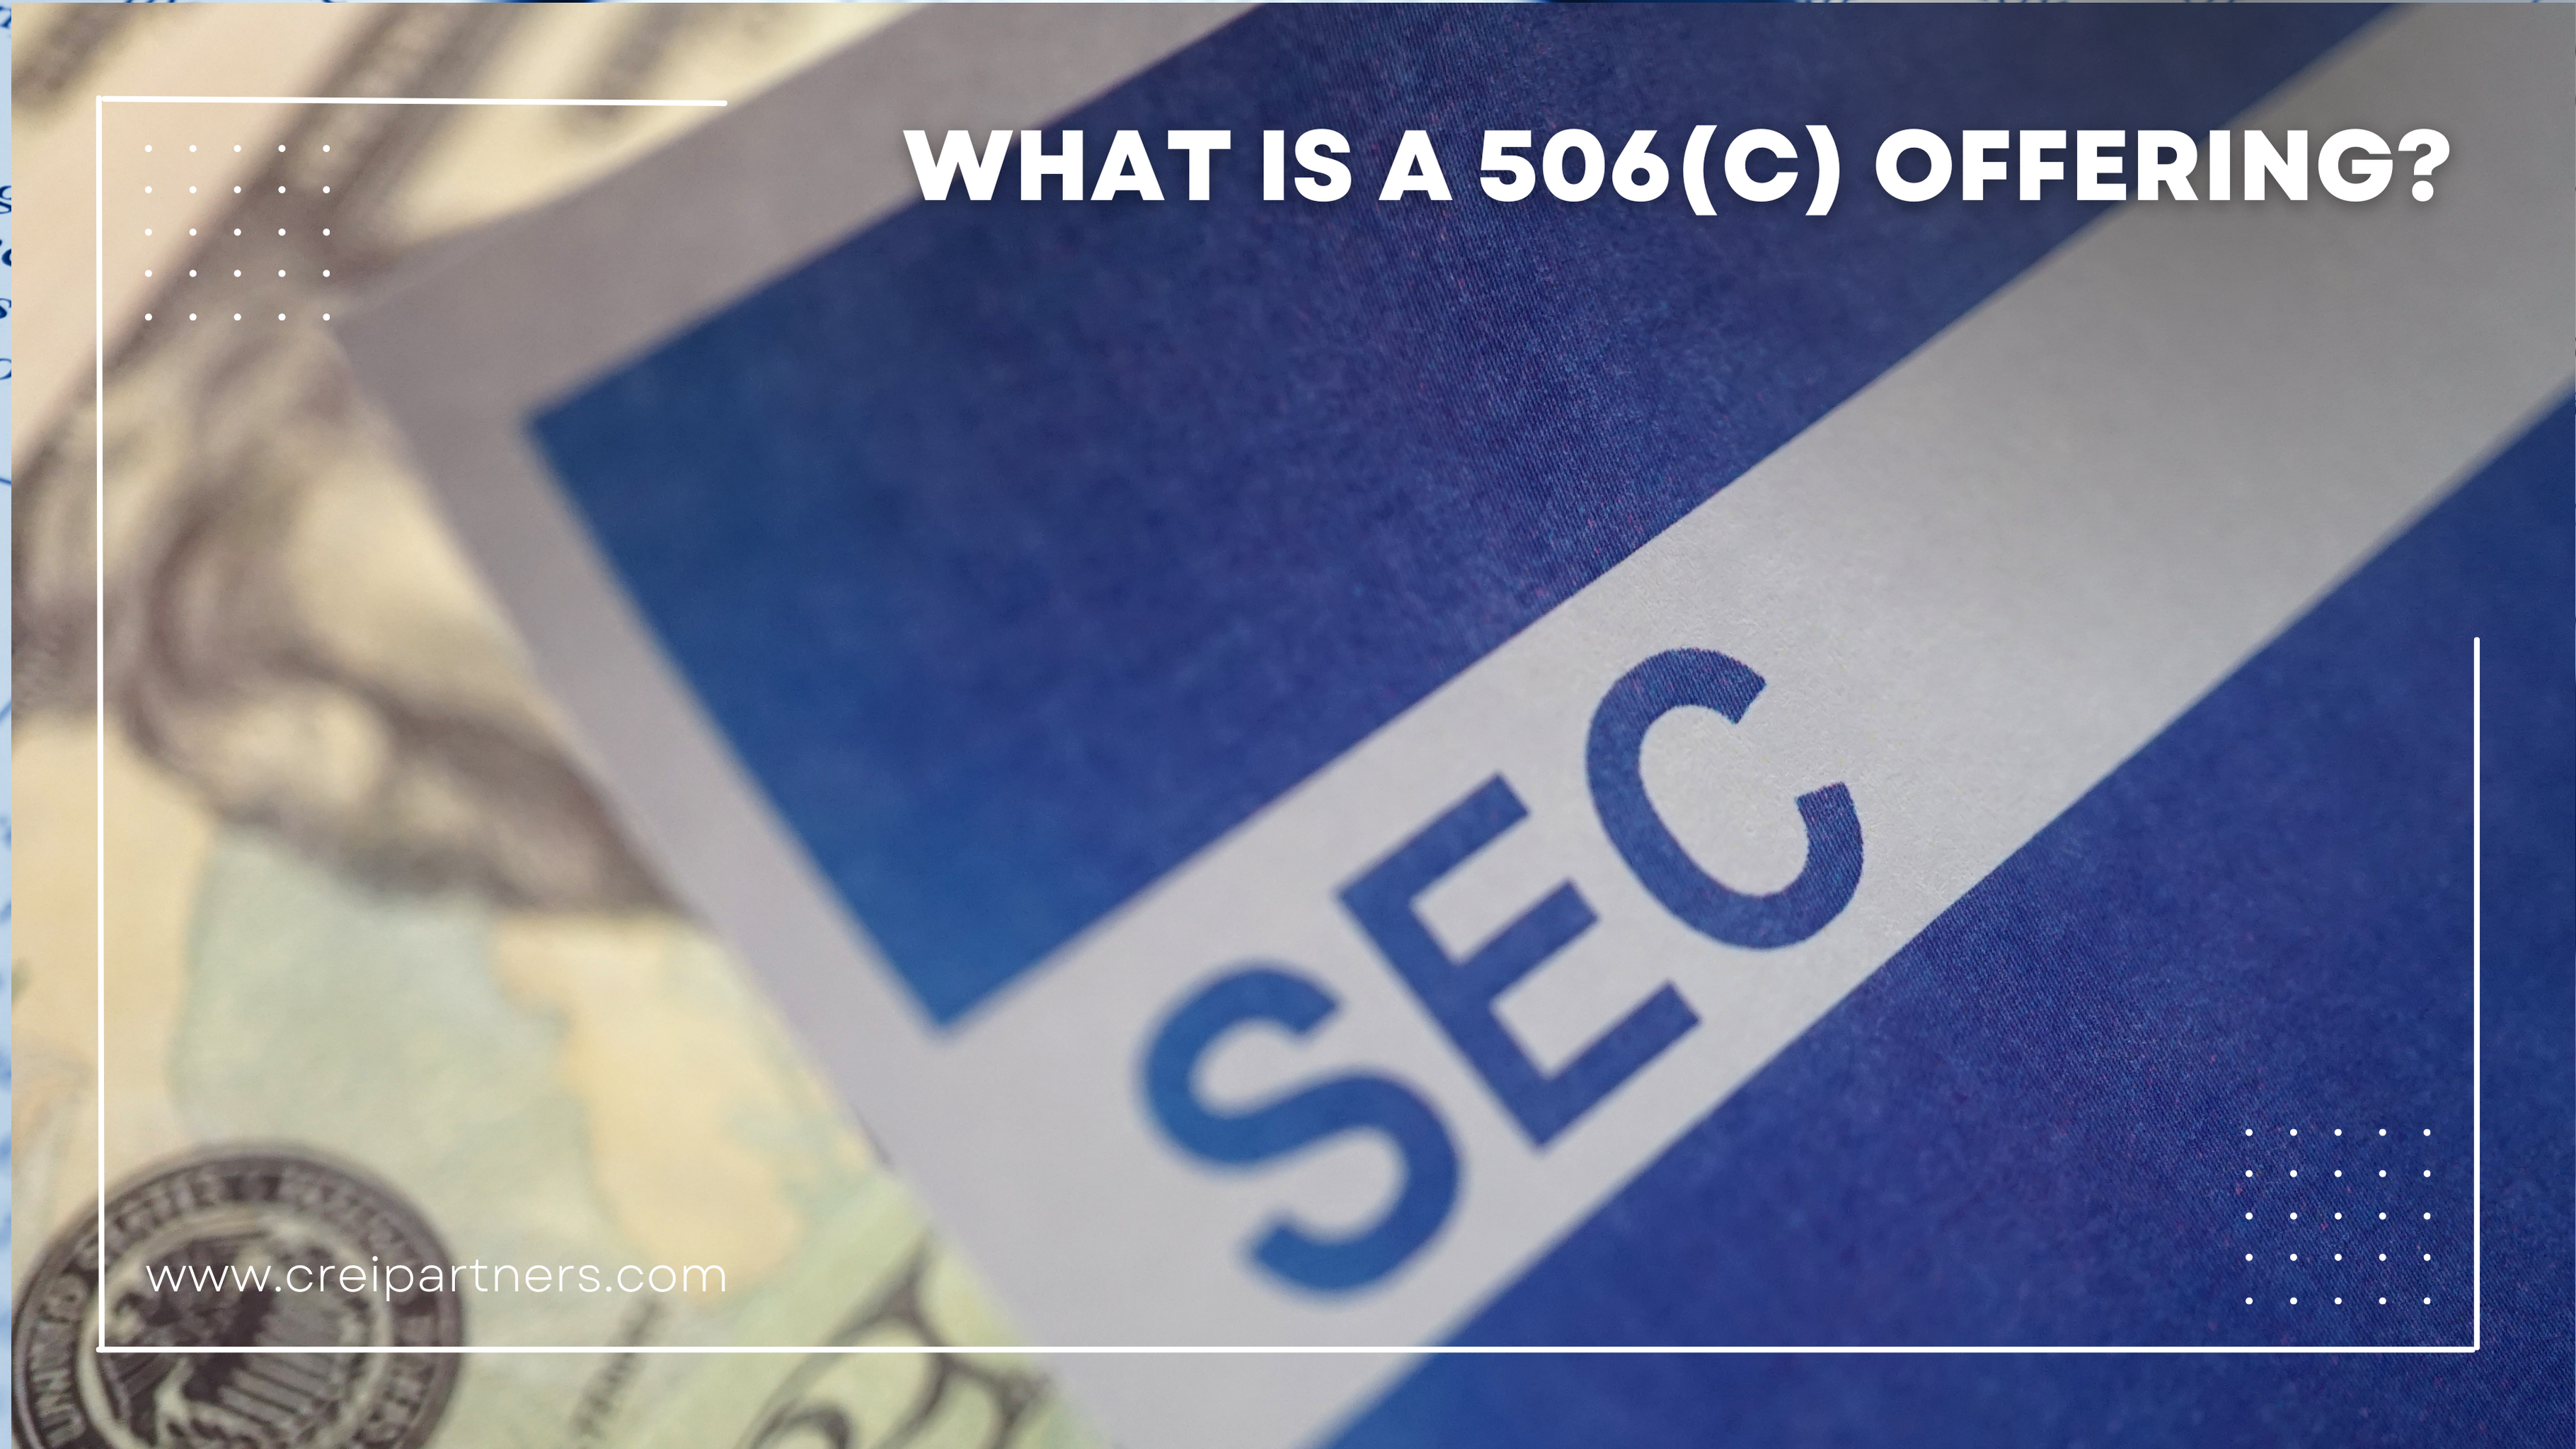 What is a 506(c) offering? By CREI Partners